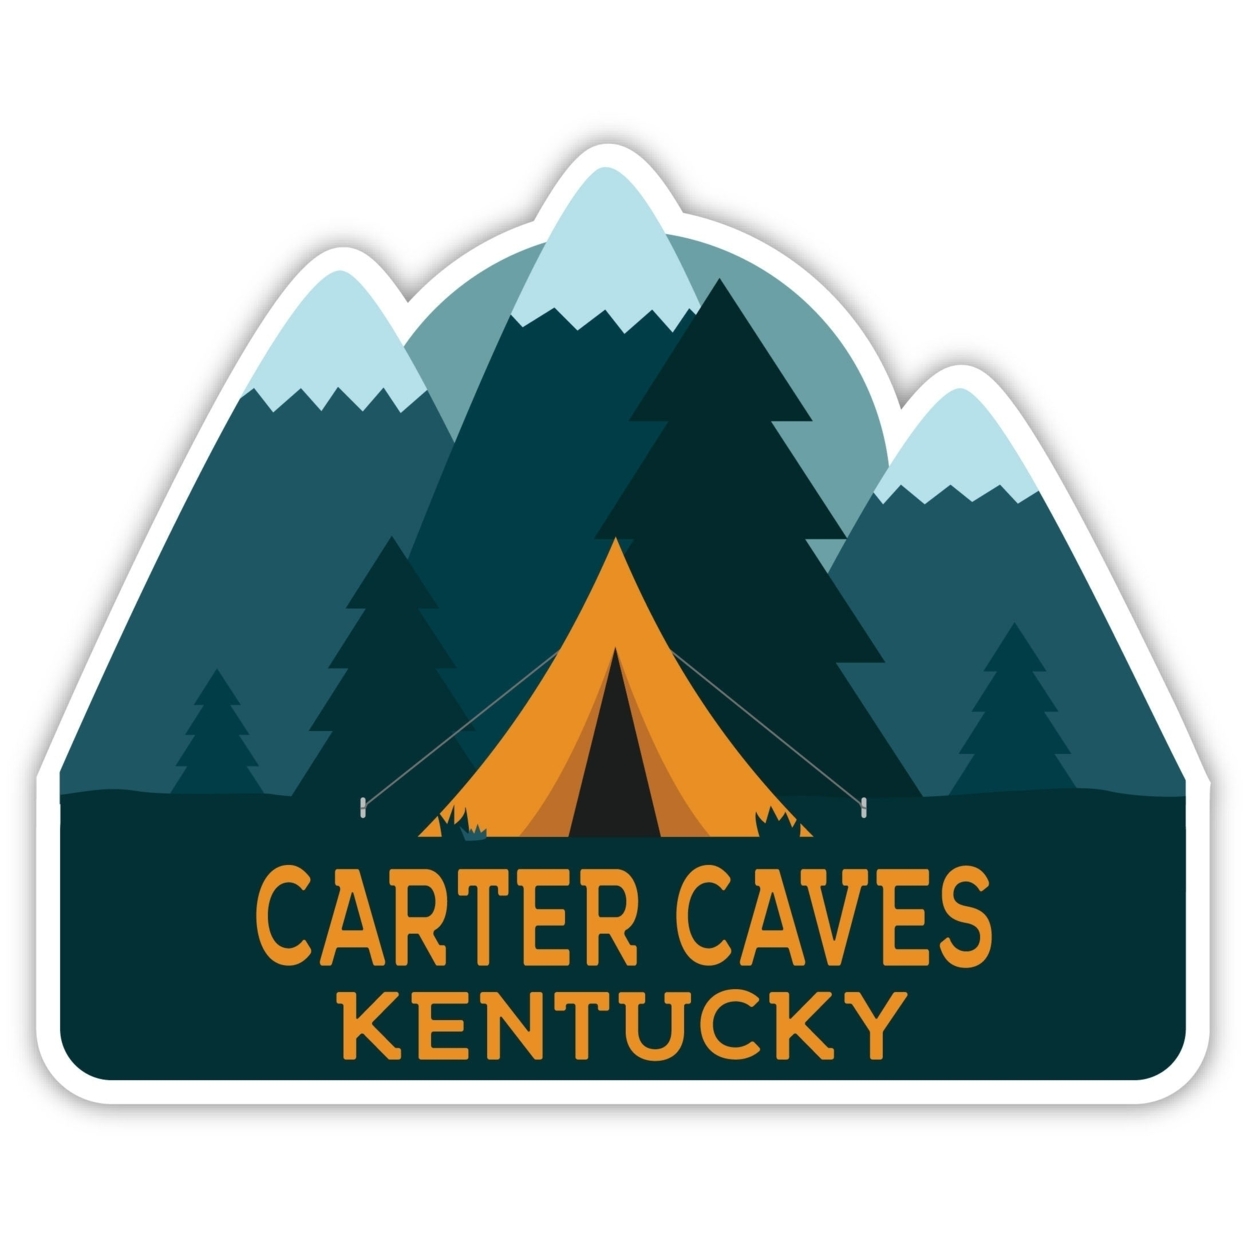 Carter Caves Kentucky Souvenir Decorative Stickers (Choose Theme And Size) - 4-Pack, 10-Inch, Tent